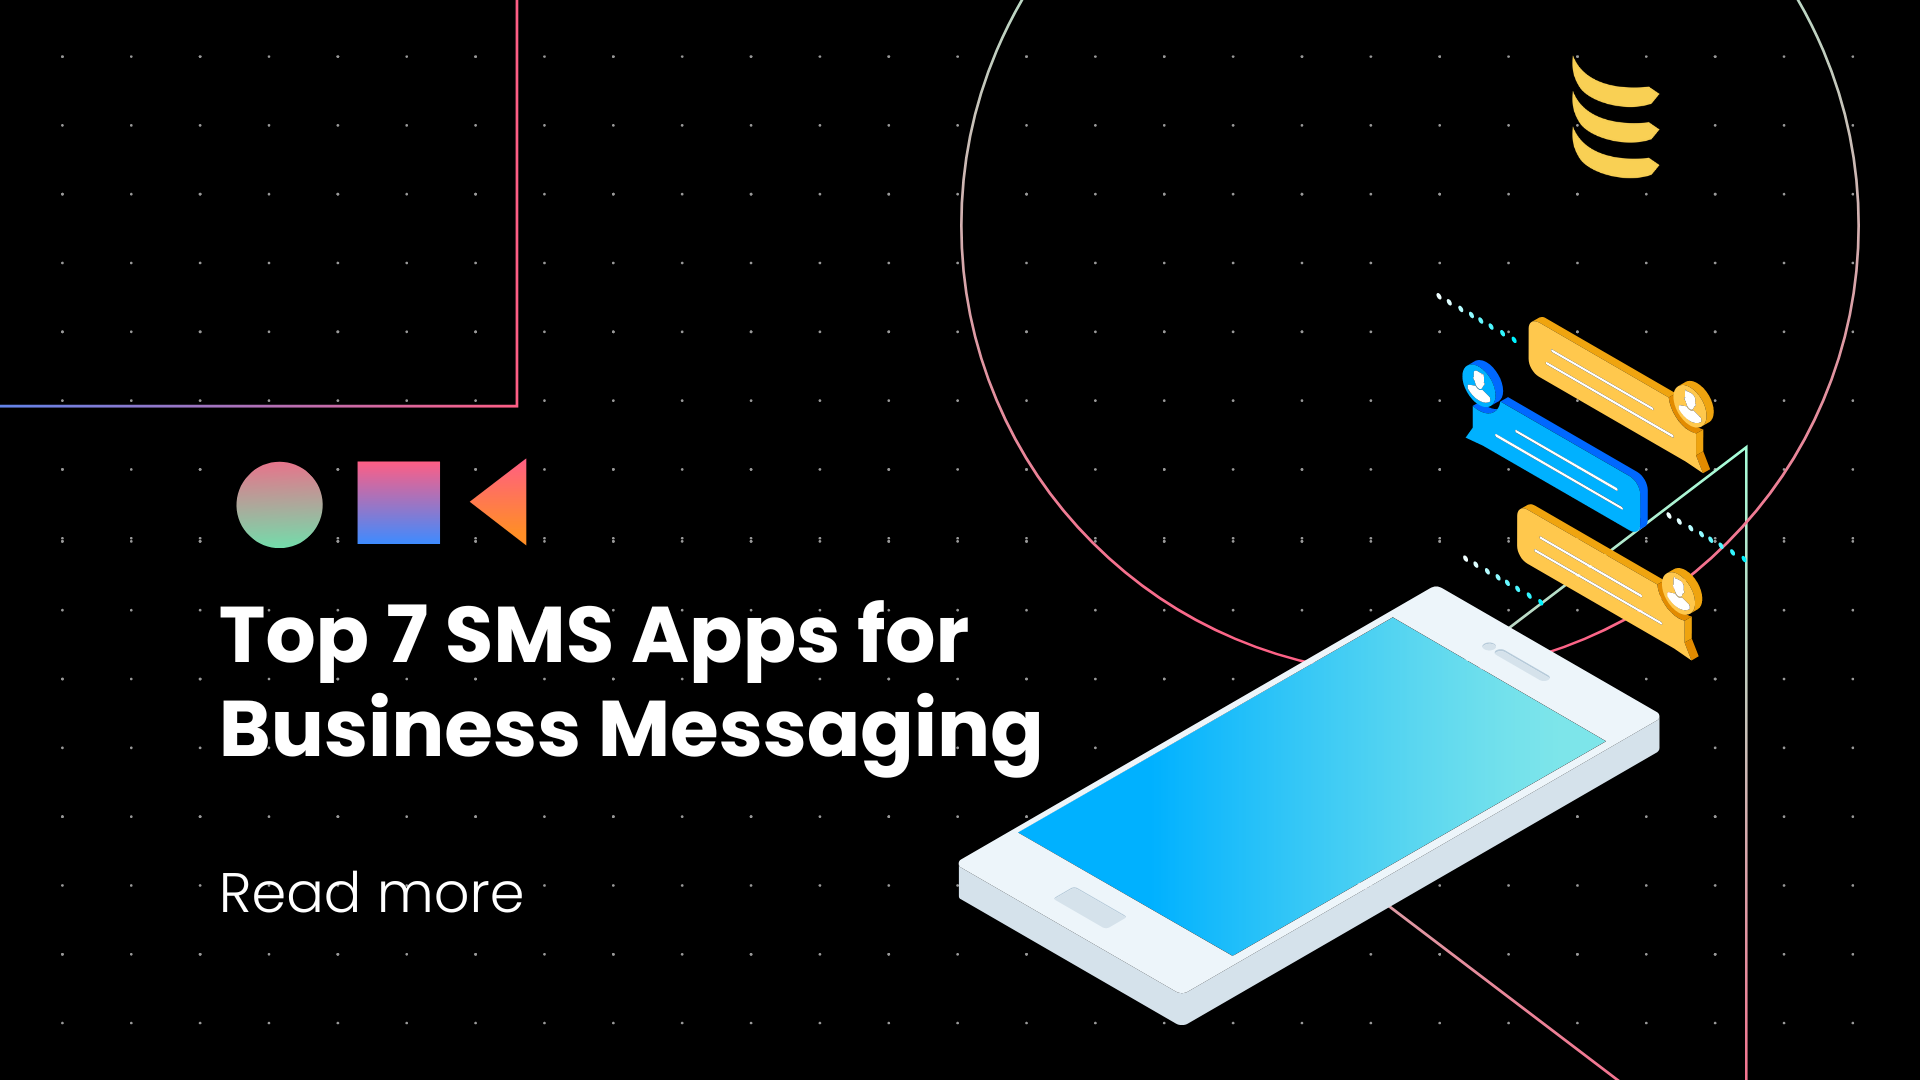 Top 7 SMS Apps